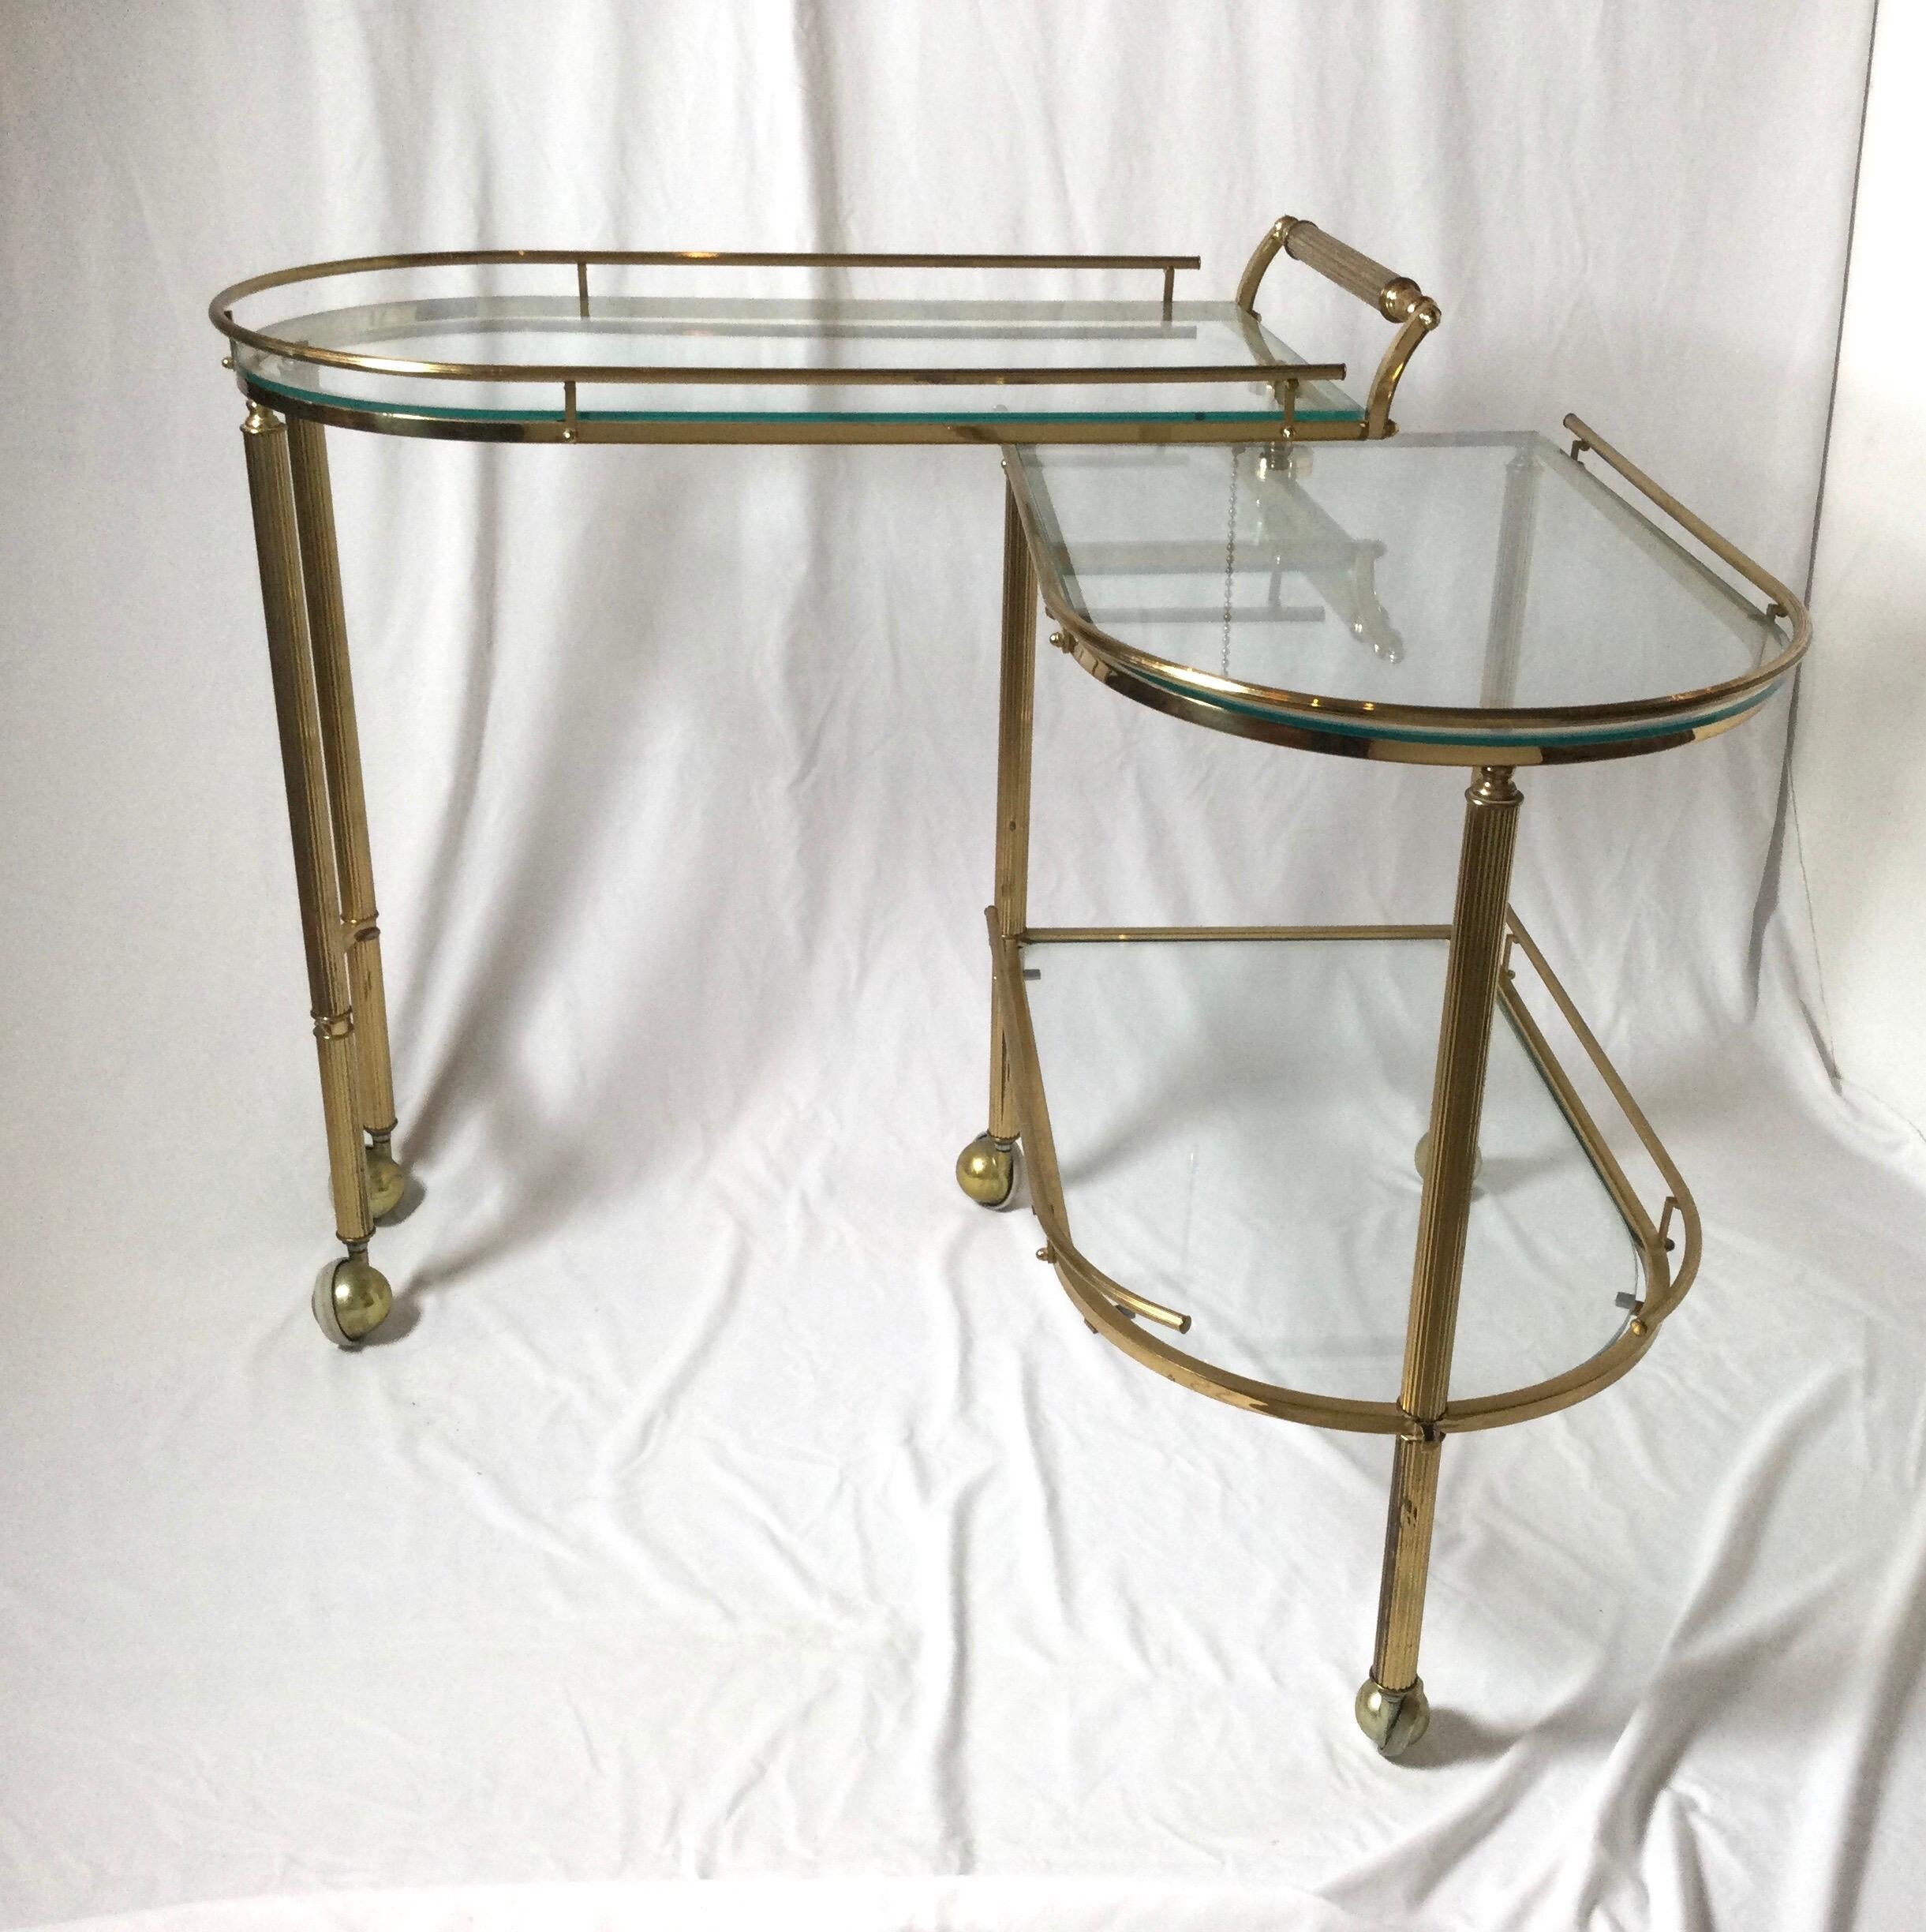 20th Century Midcentury Brass and Glass Italian Swing Out Bar Cart